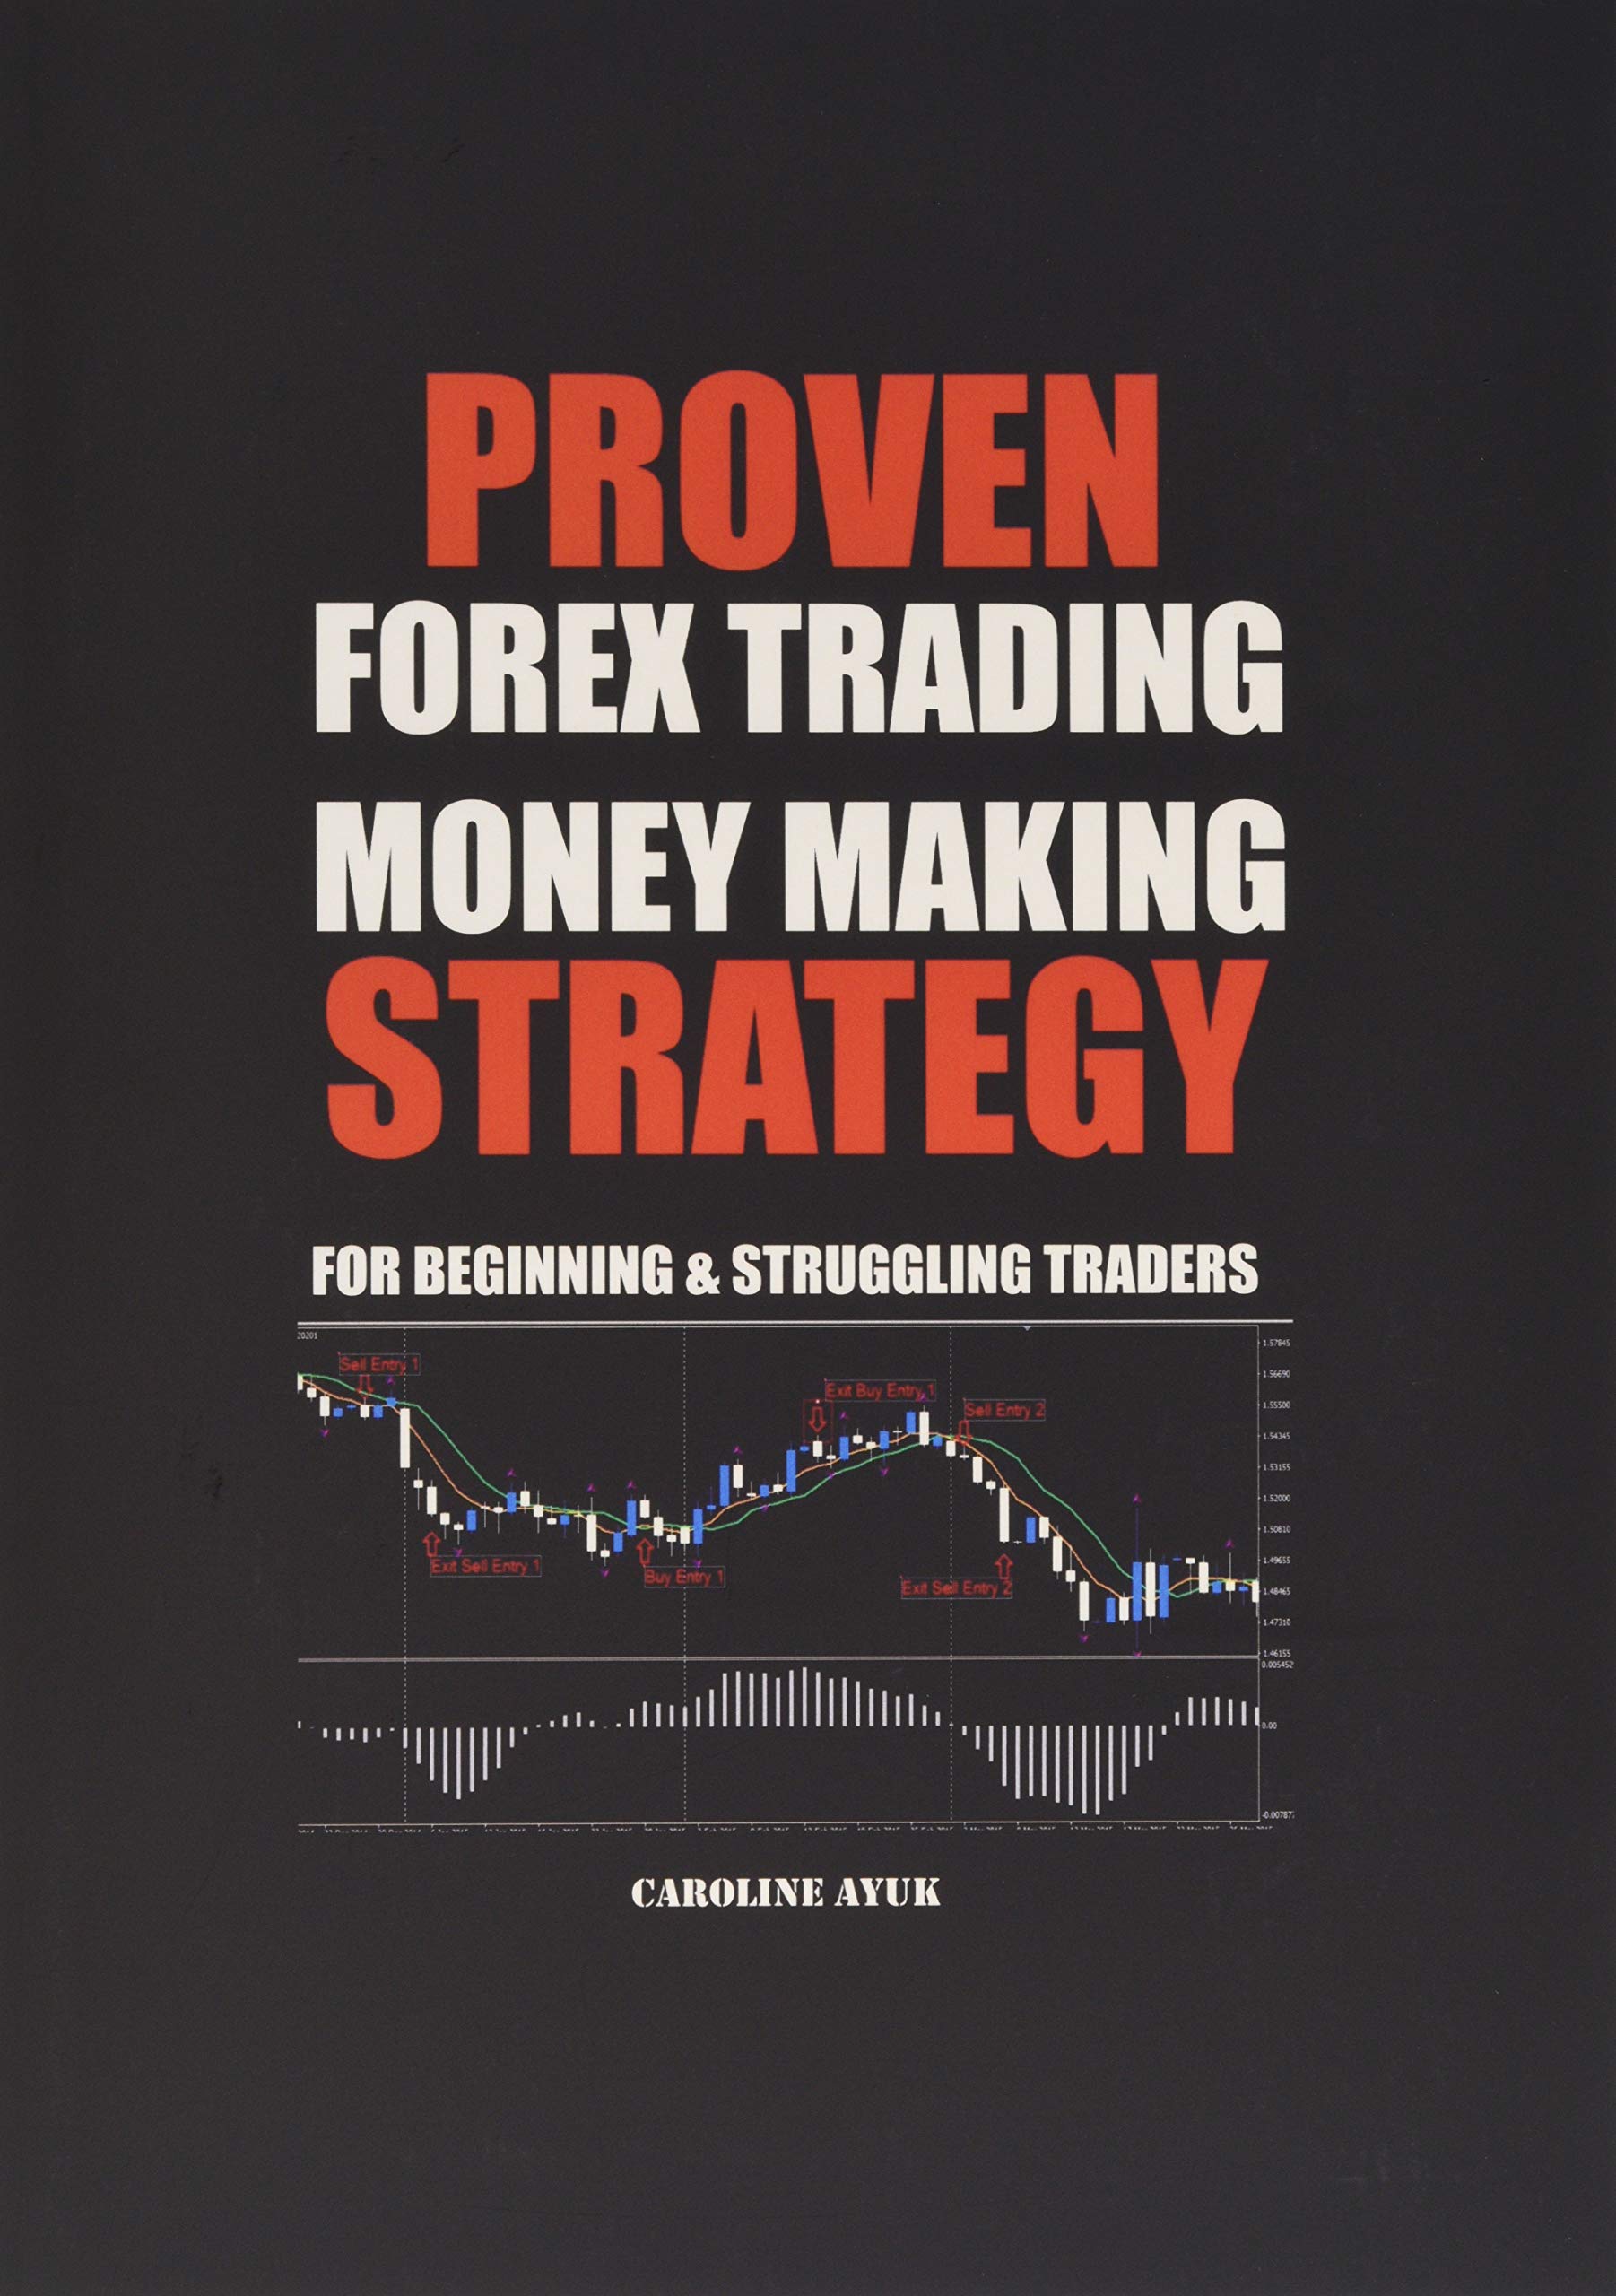 PROVEN FOREX TRADING MONEY MAKING STRATEGY - For Beginning and Struggling Traders (PDF)